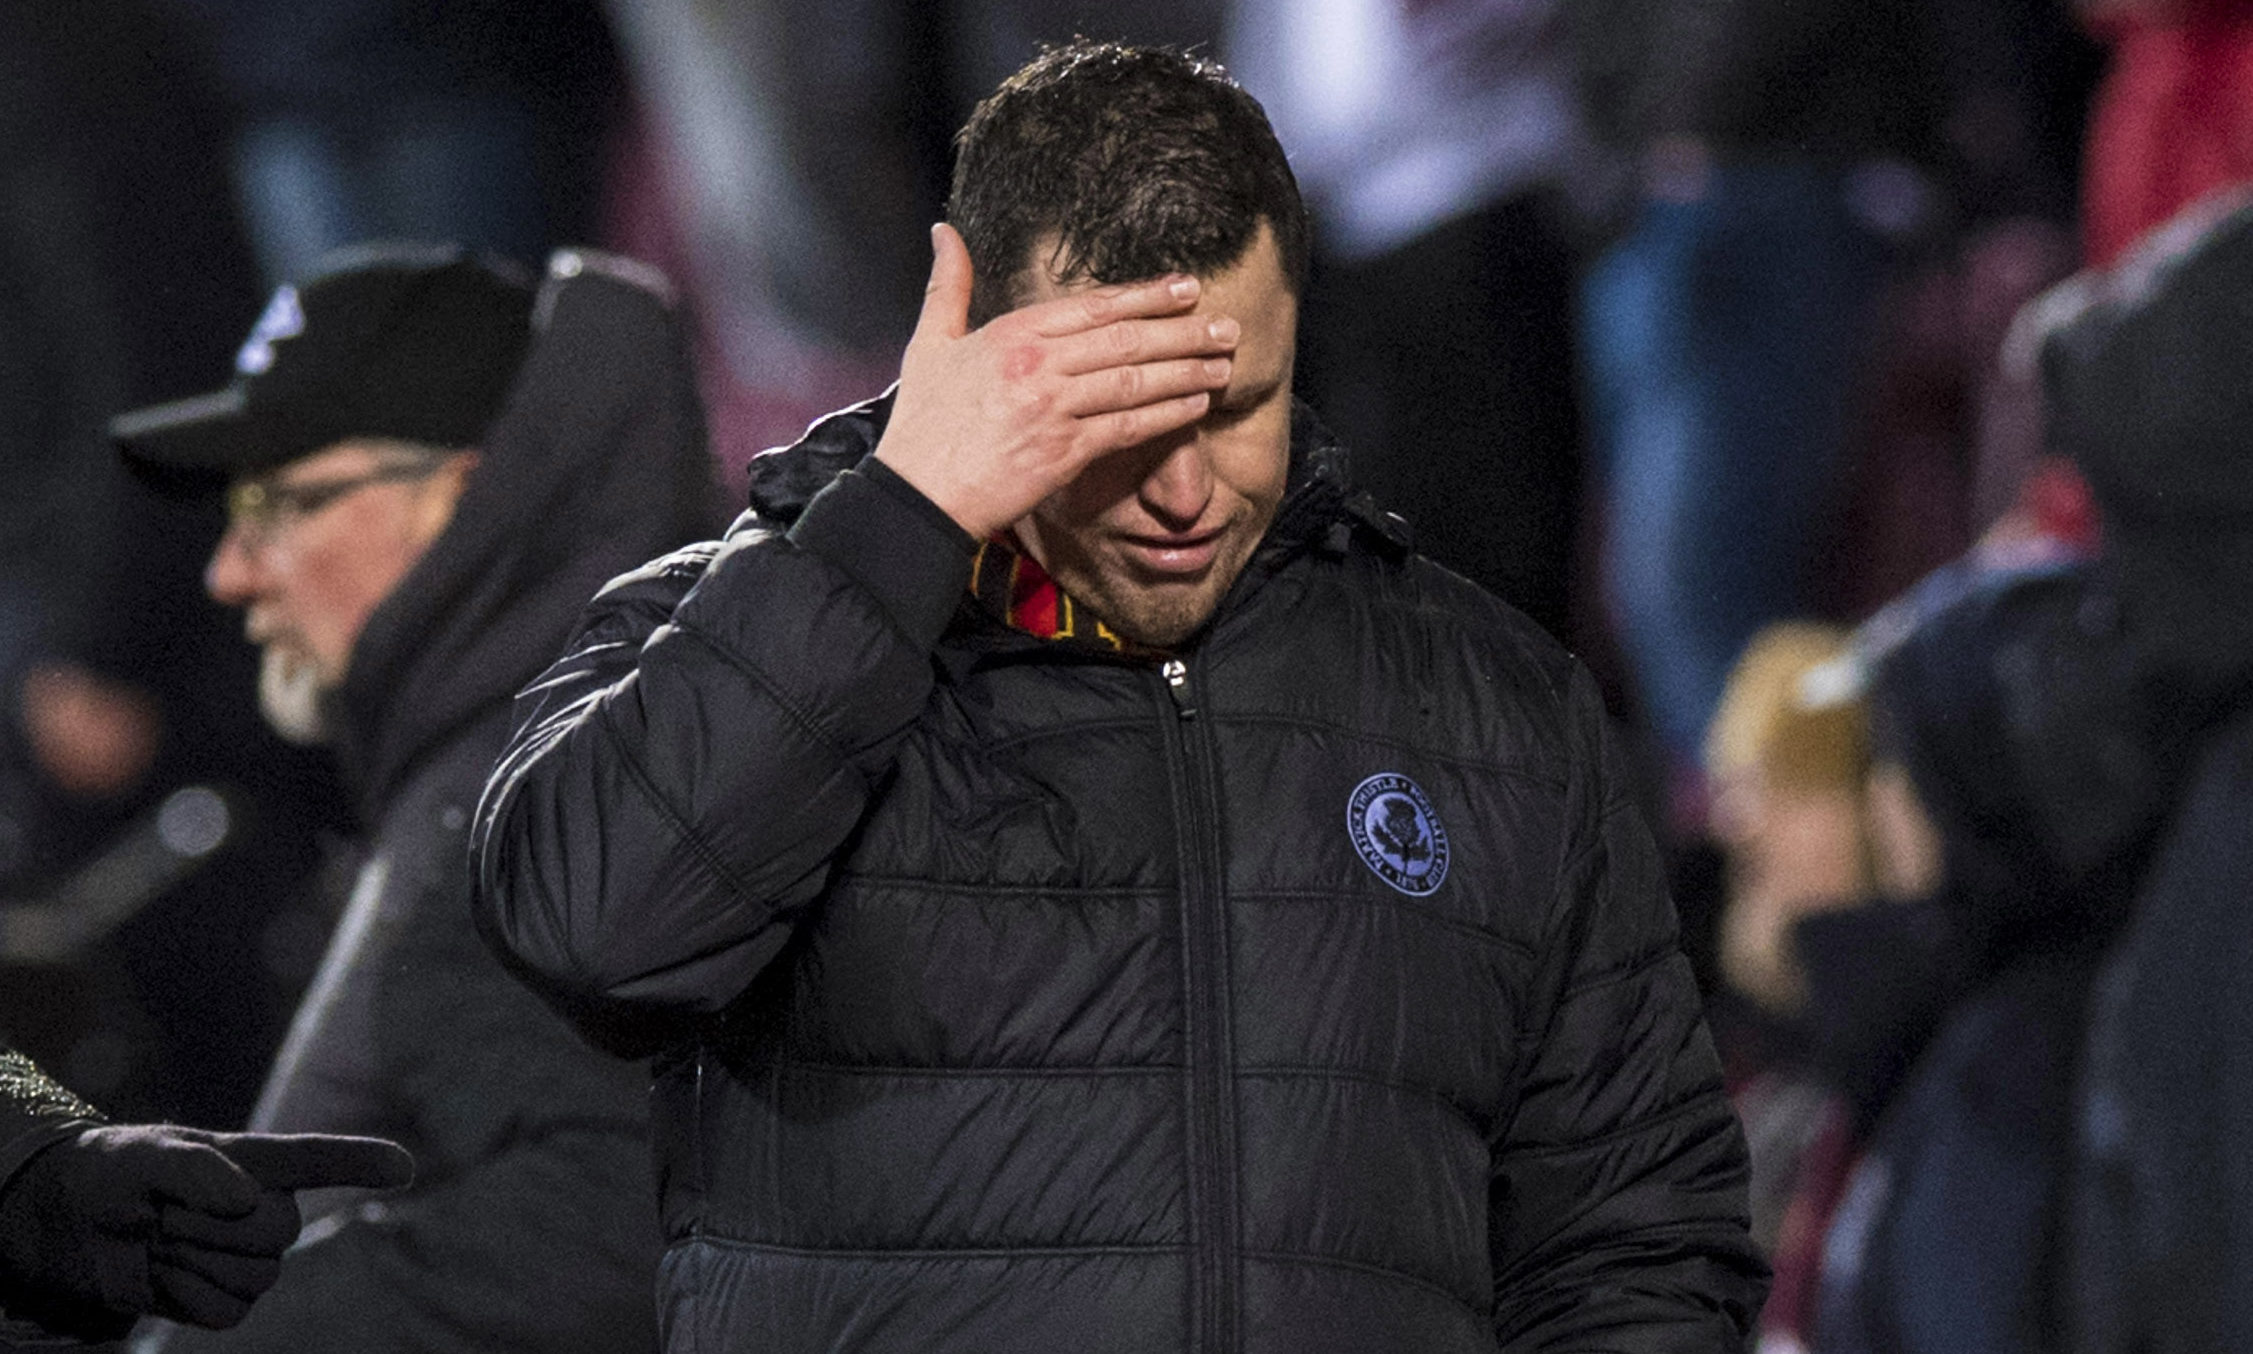 Partick Thistle manager Gary Caldwell (R) show's his frustration after being denied a penalty late on